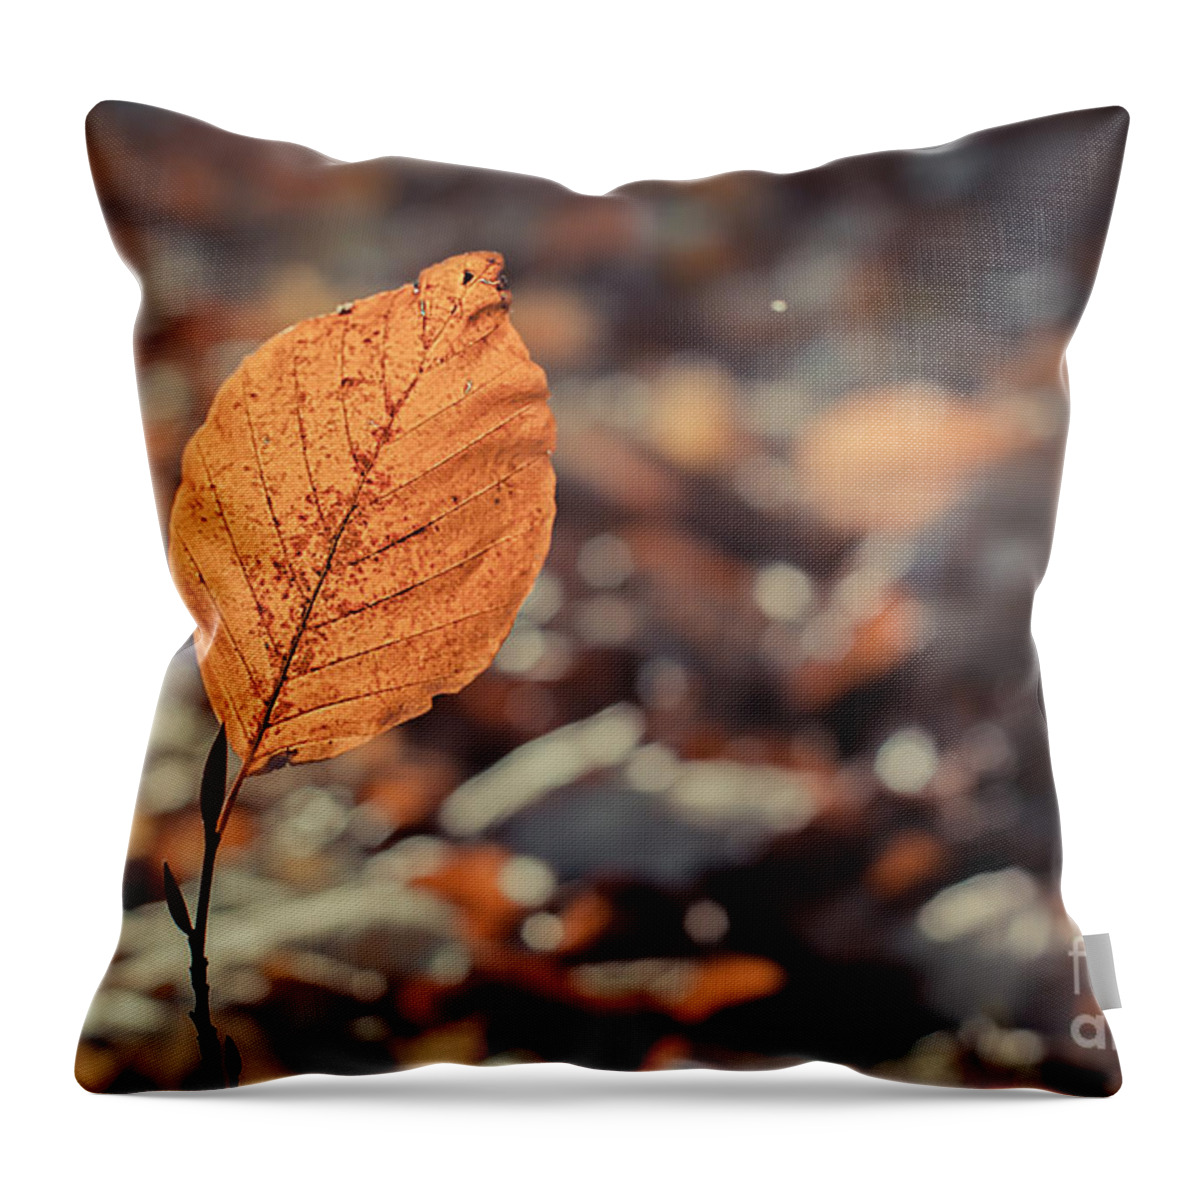 Autumn Throw Pillow featuring the photograph The Leaf by Hannes Cmarits